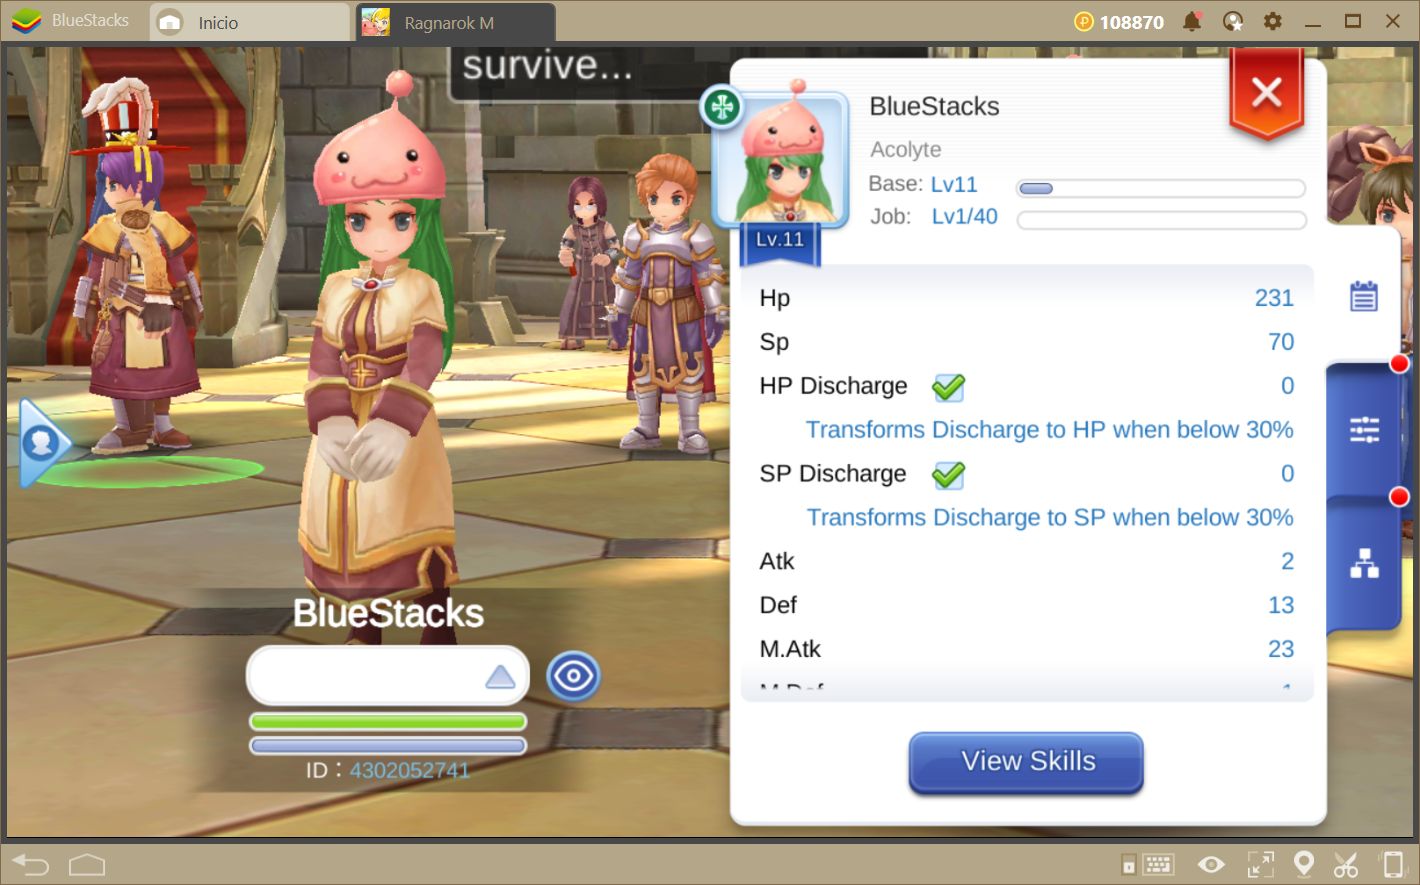 Relive the Classic Online Experience With Ragnarok M: Eternal Love and BlueStacks